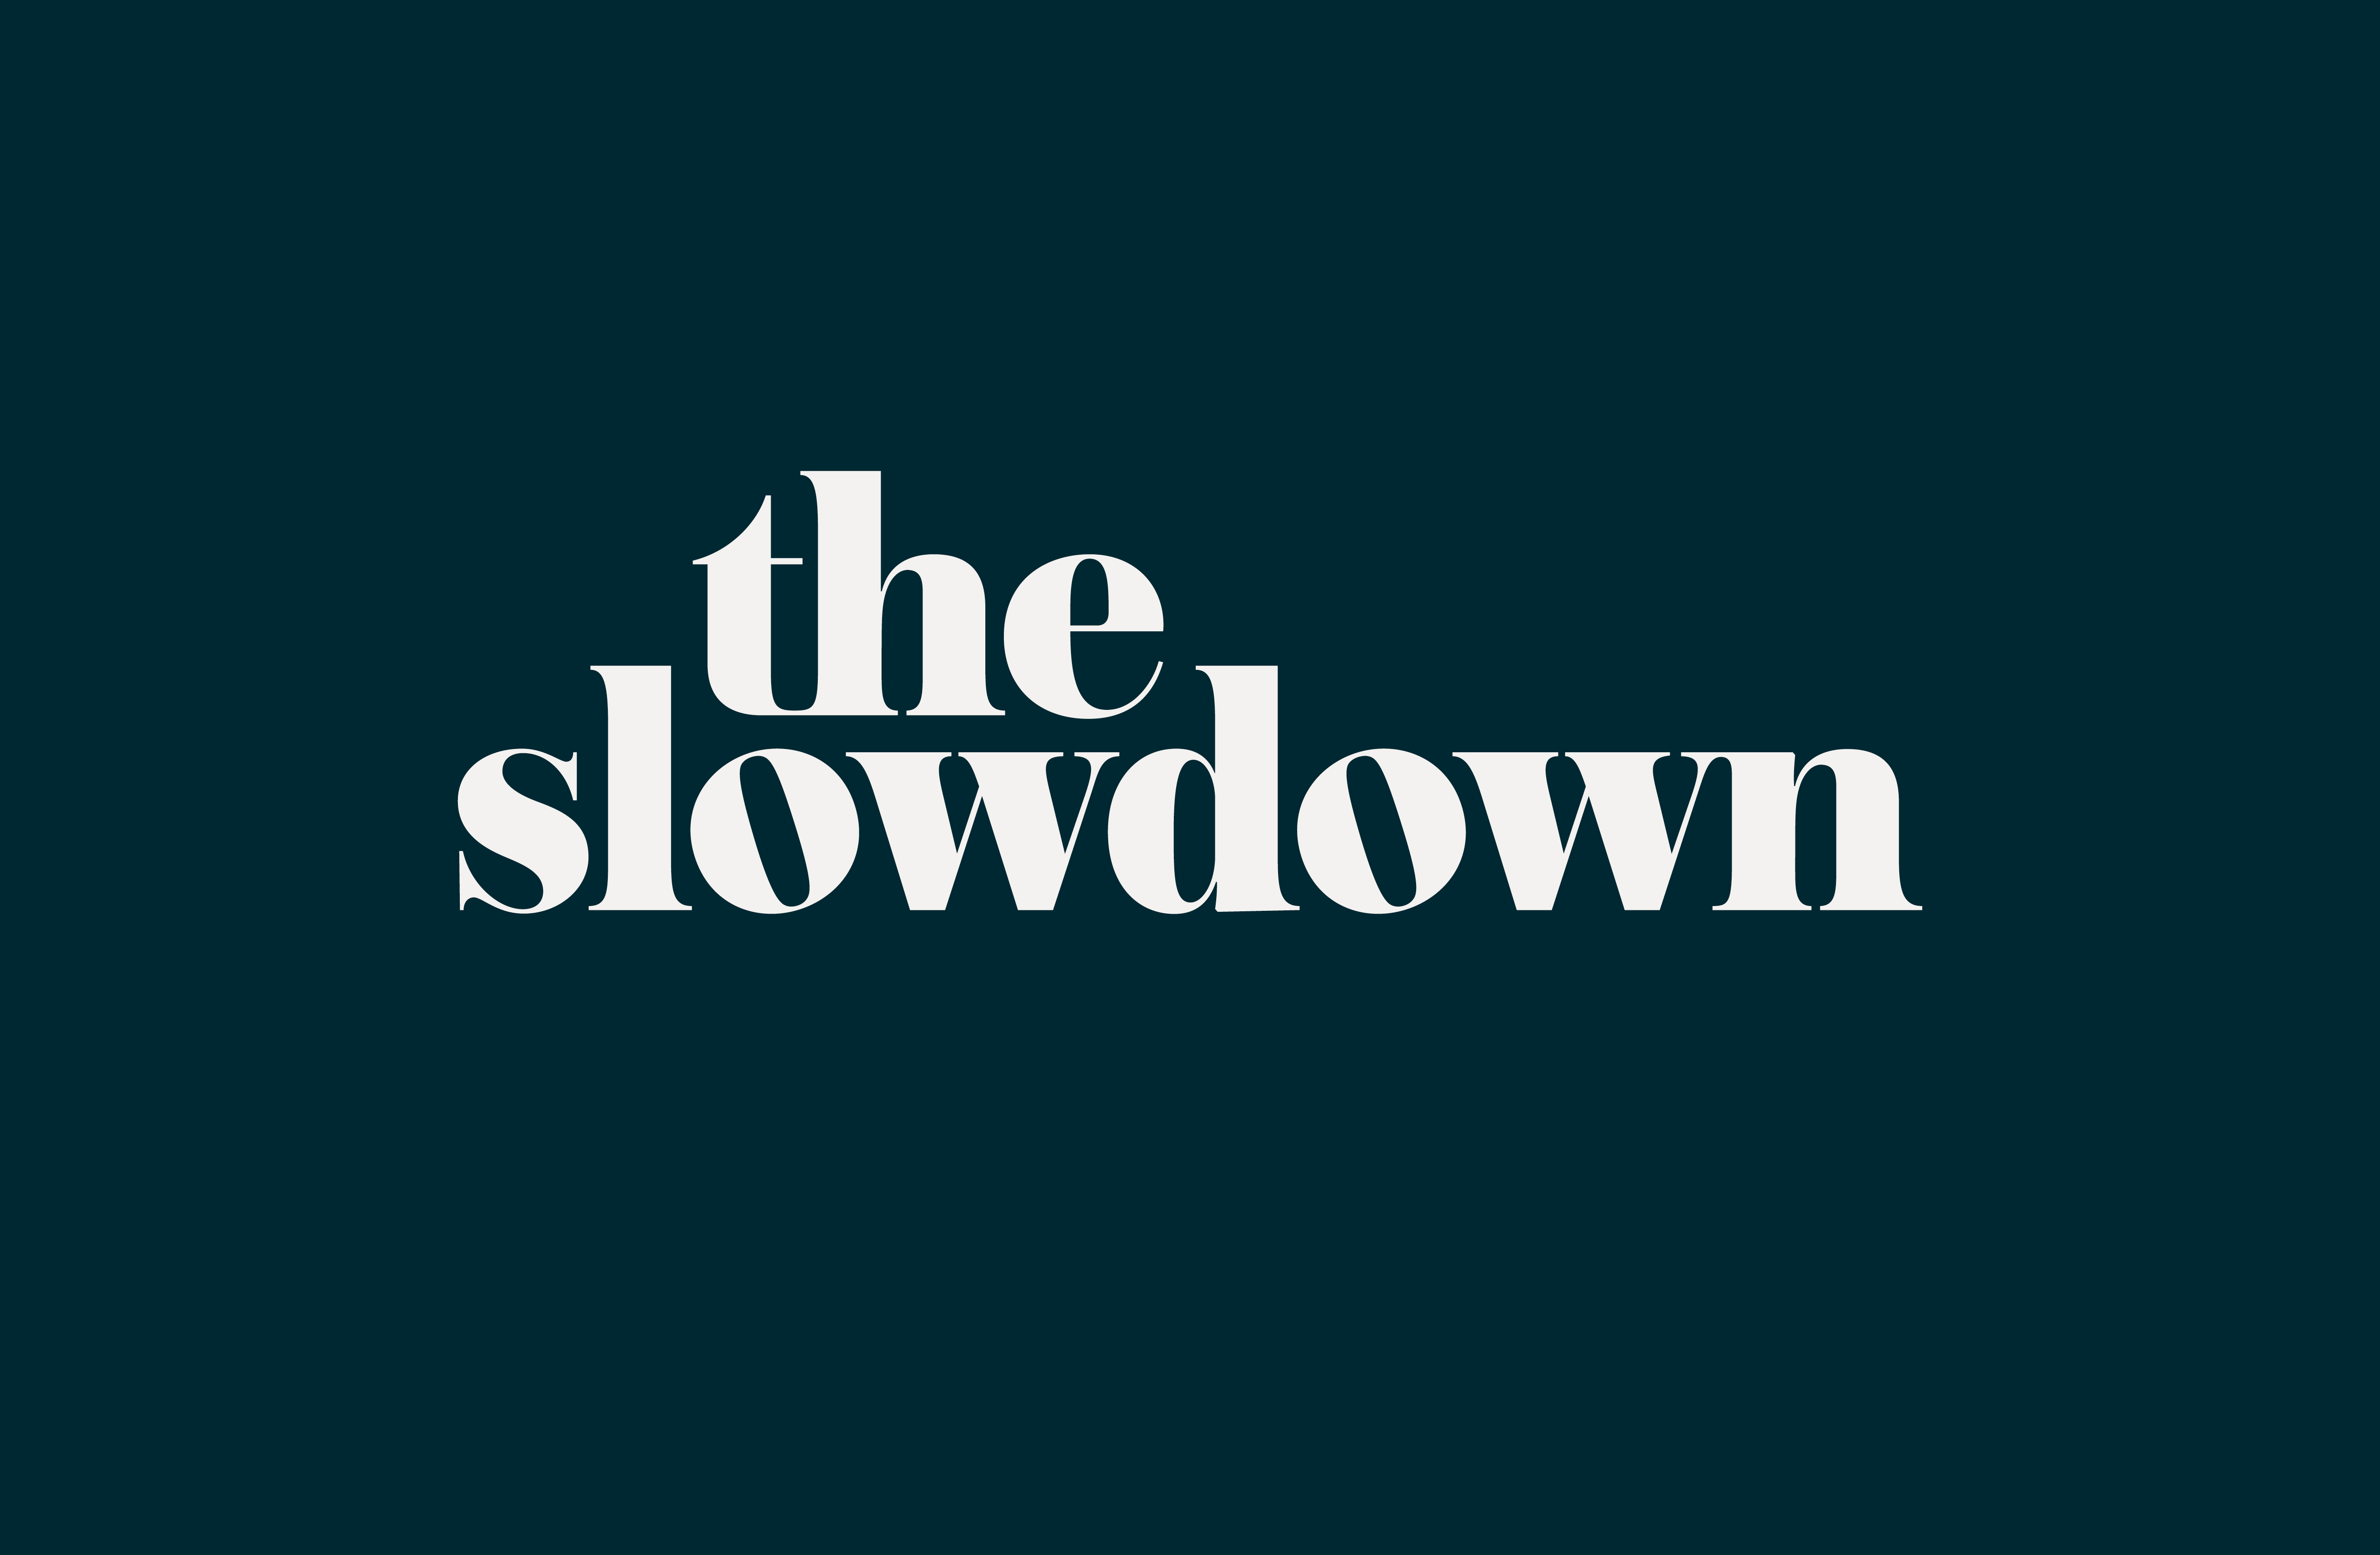 25 Best Things About Slowdowntoleap